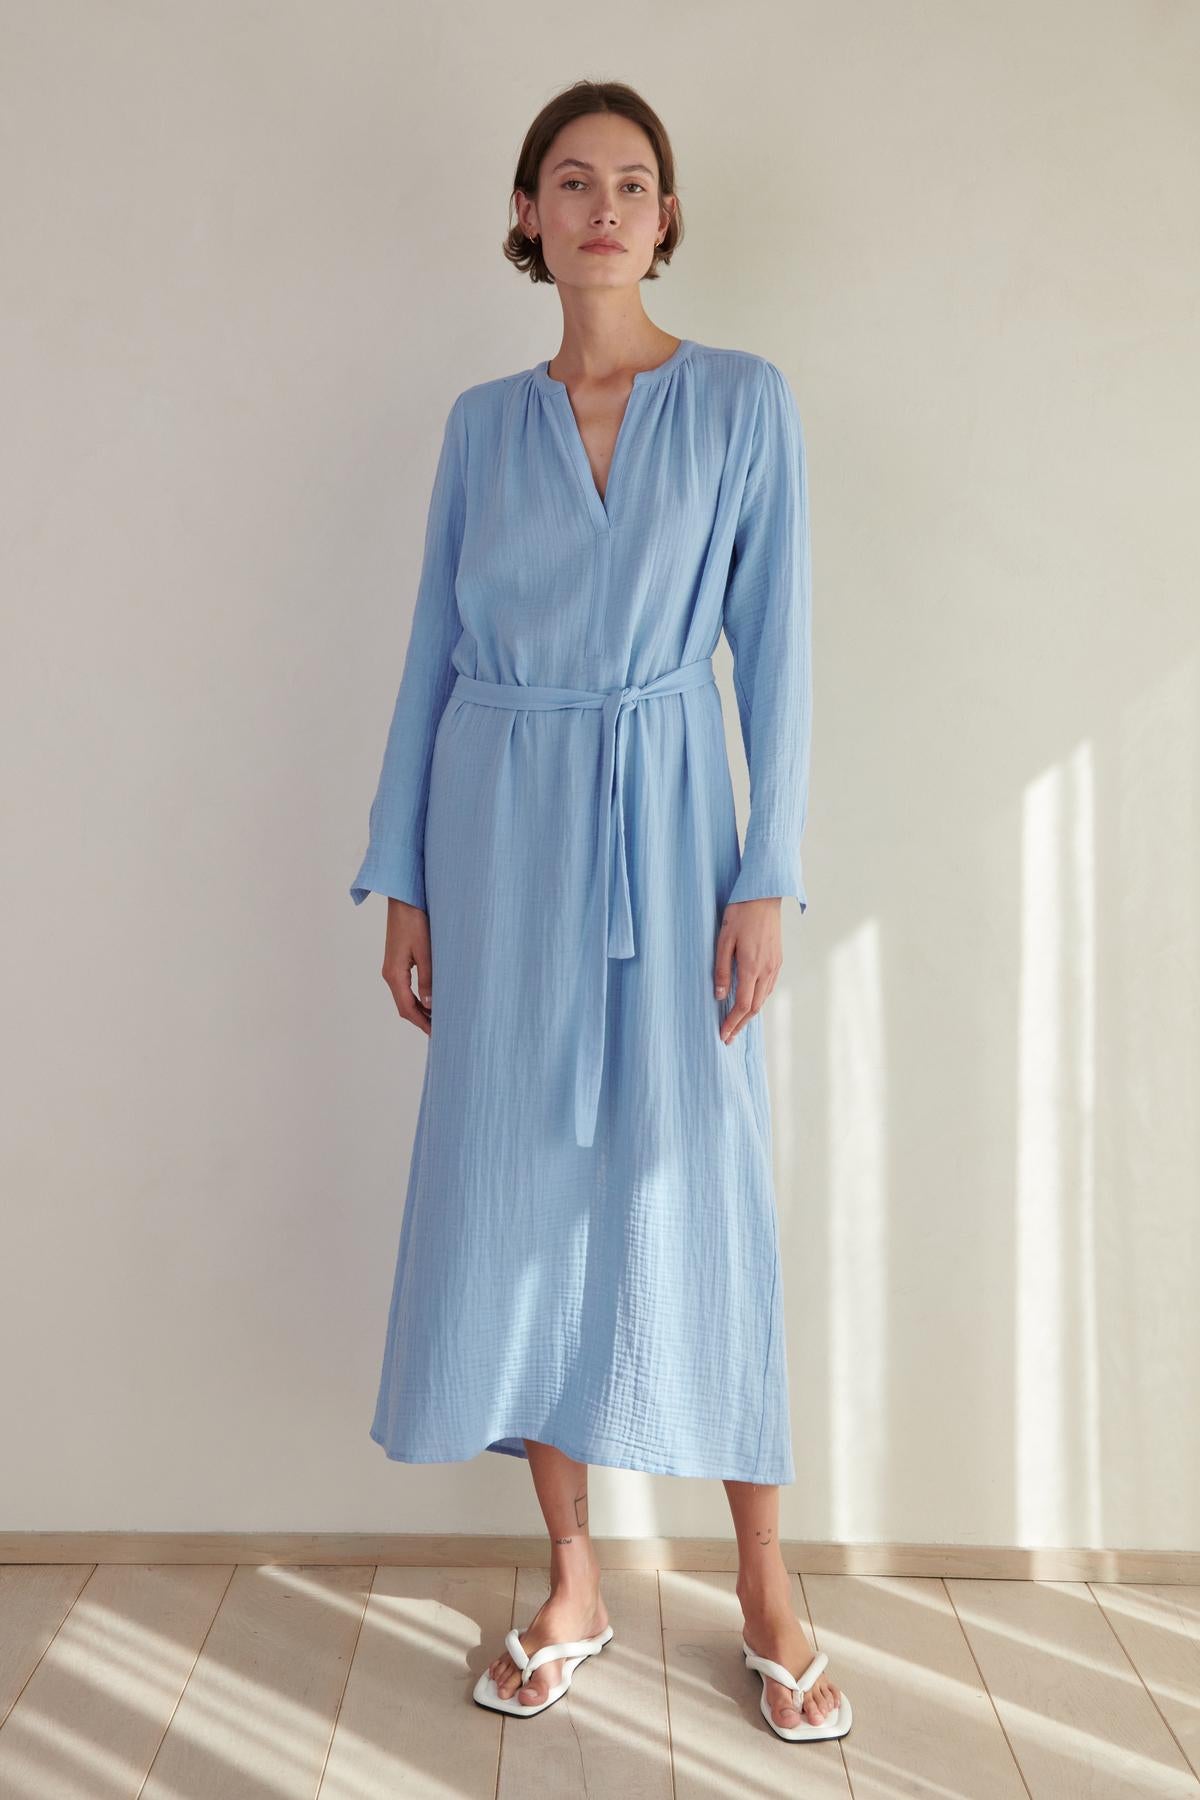 A woman wearing a blue DOHENY DRESS by Velvet by Jenny Graham and sandals.-26293207531713